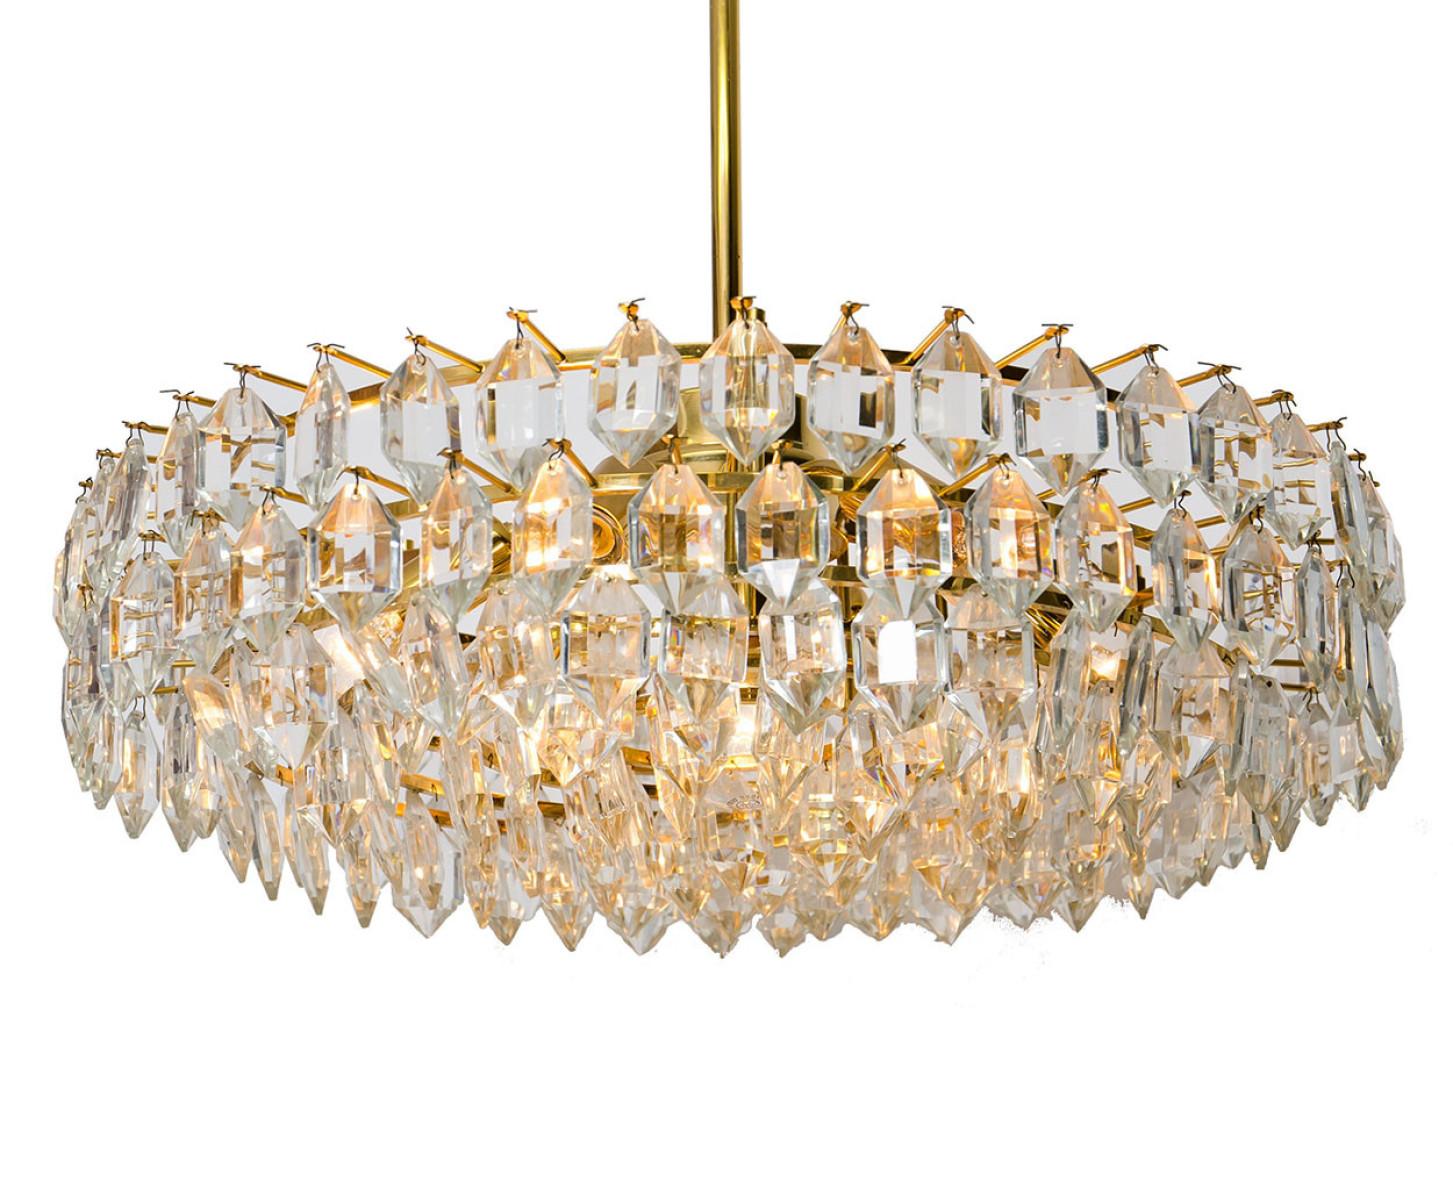 Pair of Bakalowits & Sohne Chandeliers, Brass and Crystal Glass, Austria, 1960s For Sale 1